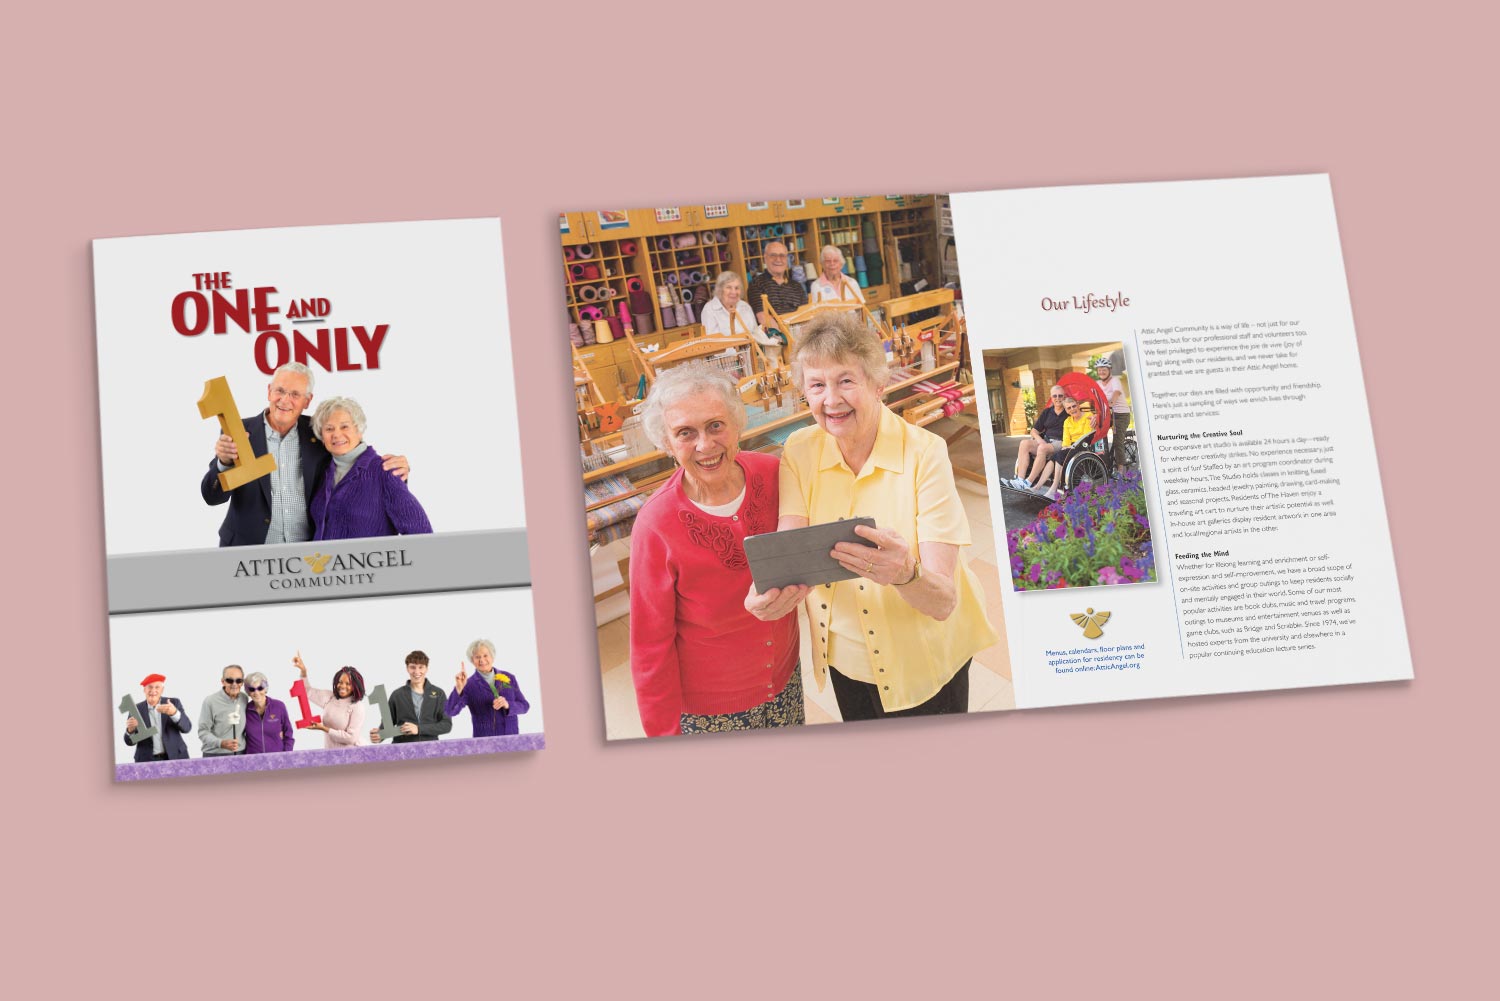 Spread of "The One and Only" brochure for Attic Angel Community